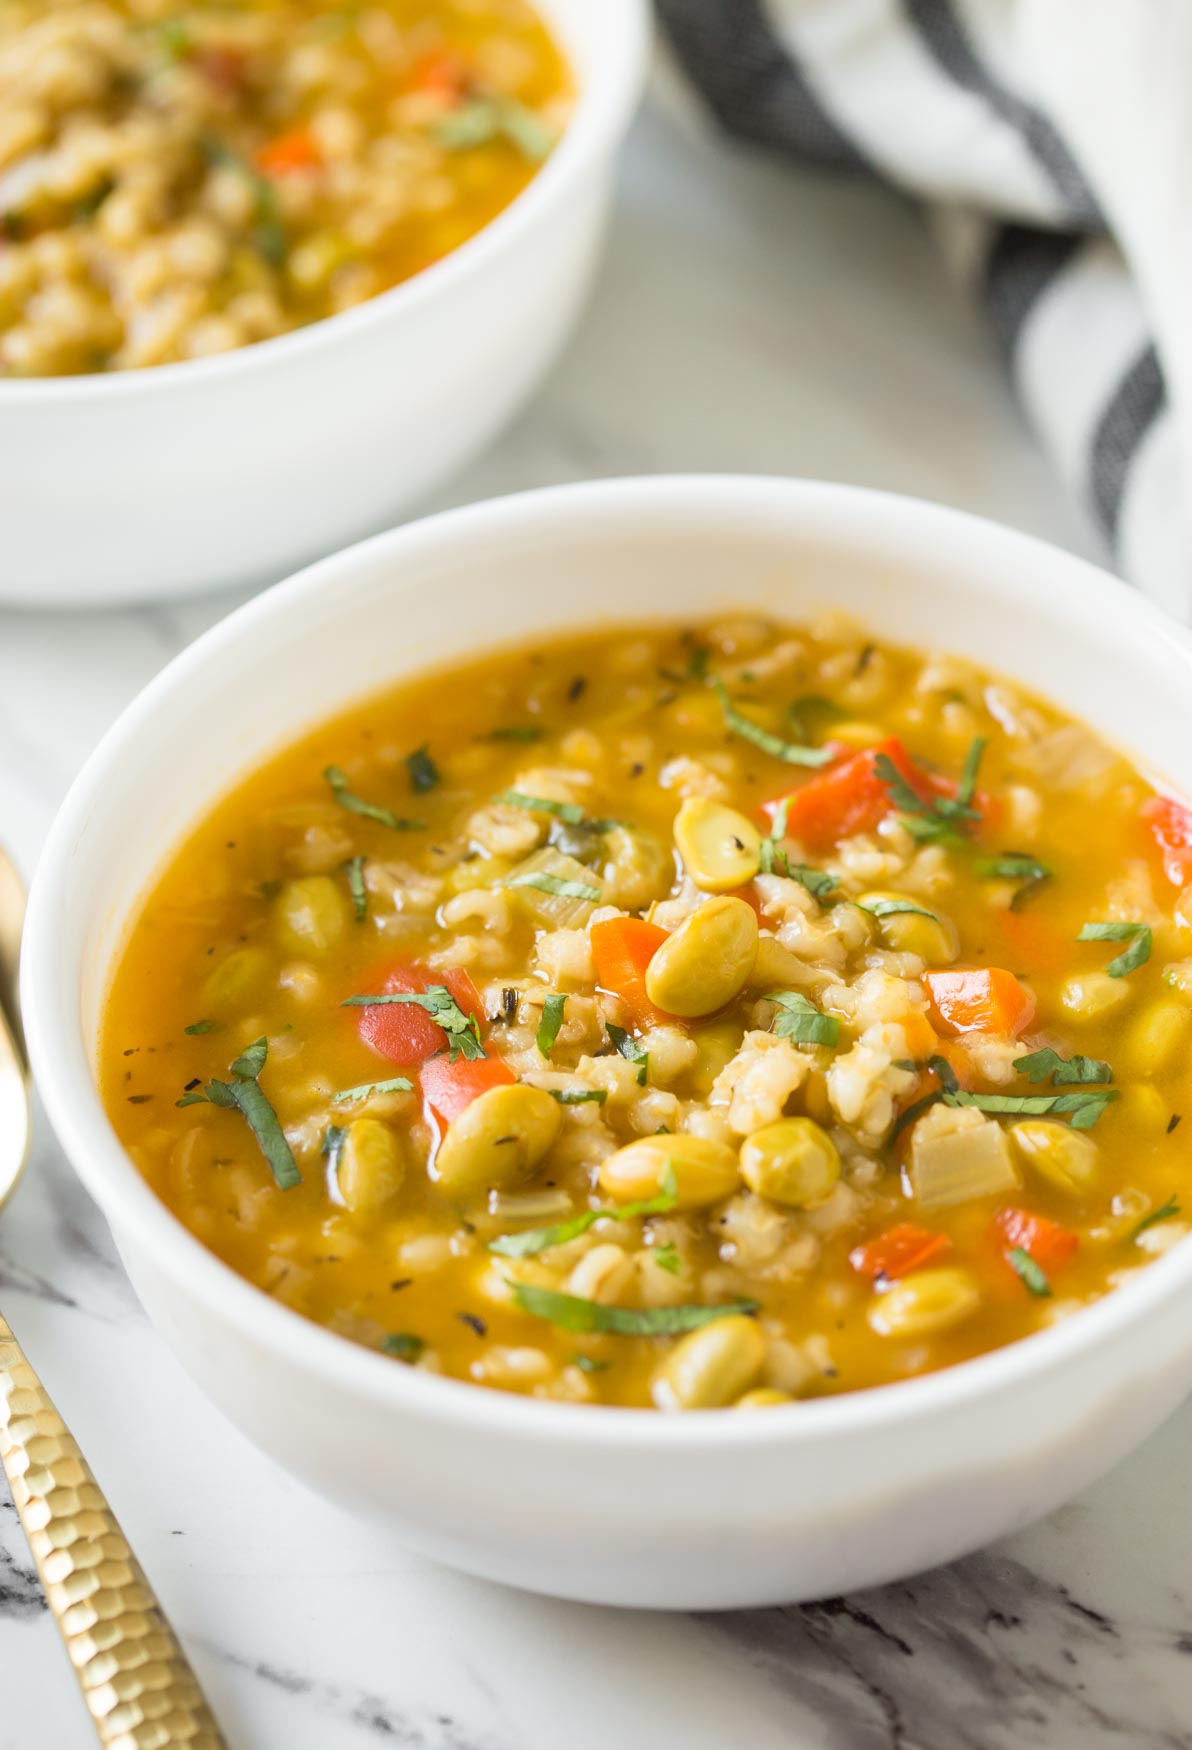 This Instant Pot Vegetable Barley Soup is a quick and easy recipe to enjoy a wholesome and nutritious soup. Full of flavors and takes about 30-40 min to prepare. And a perfect vegetable soup for weeknight dinners. | #watchwhatueat#barley #barleysoup #vegan #instantpotsoup